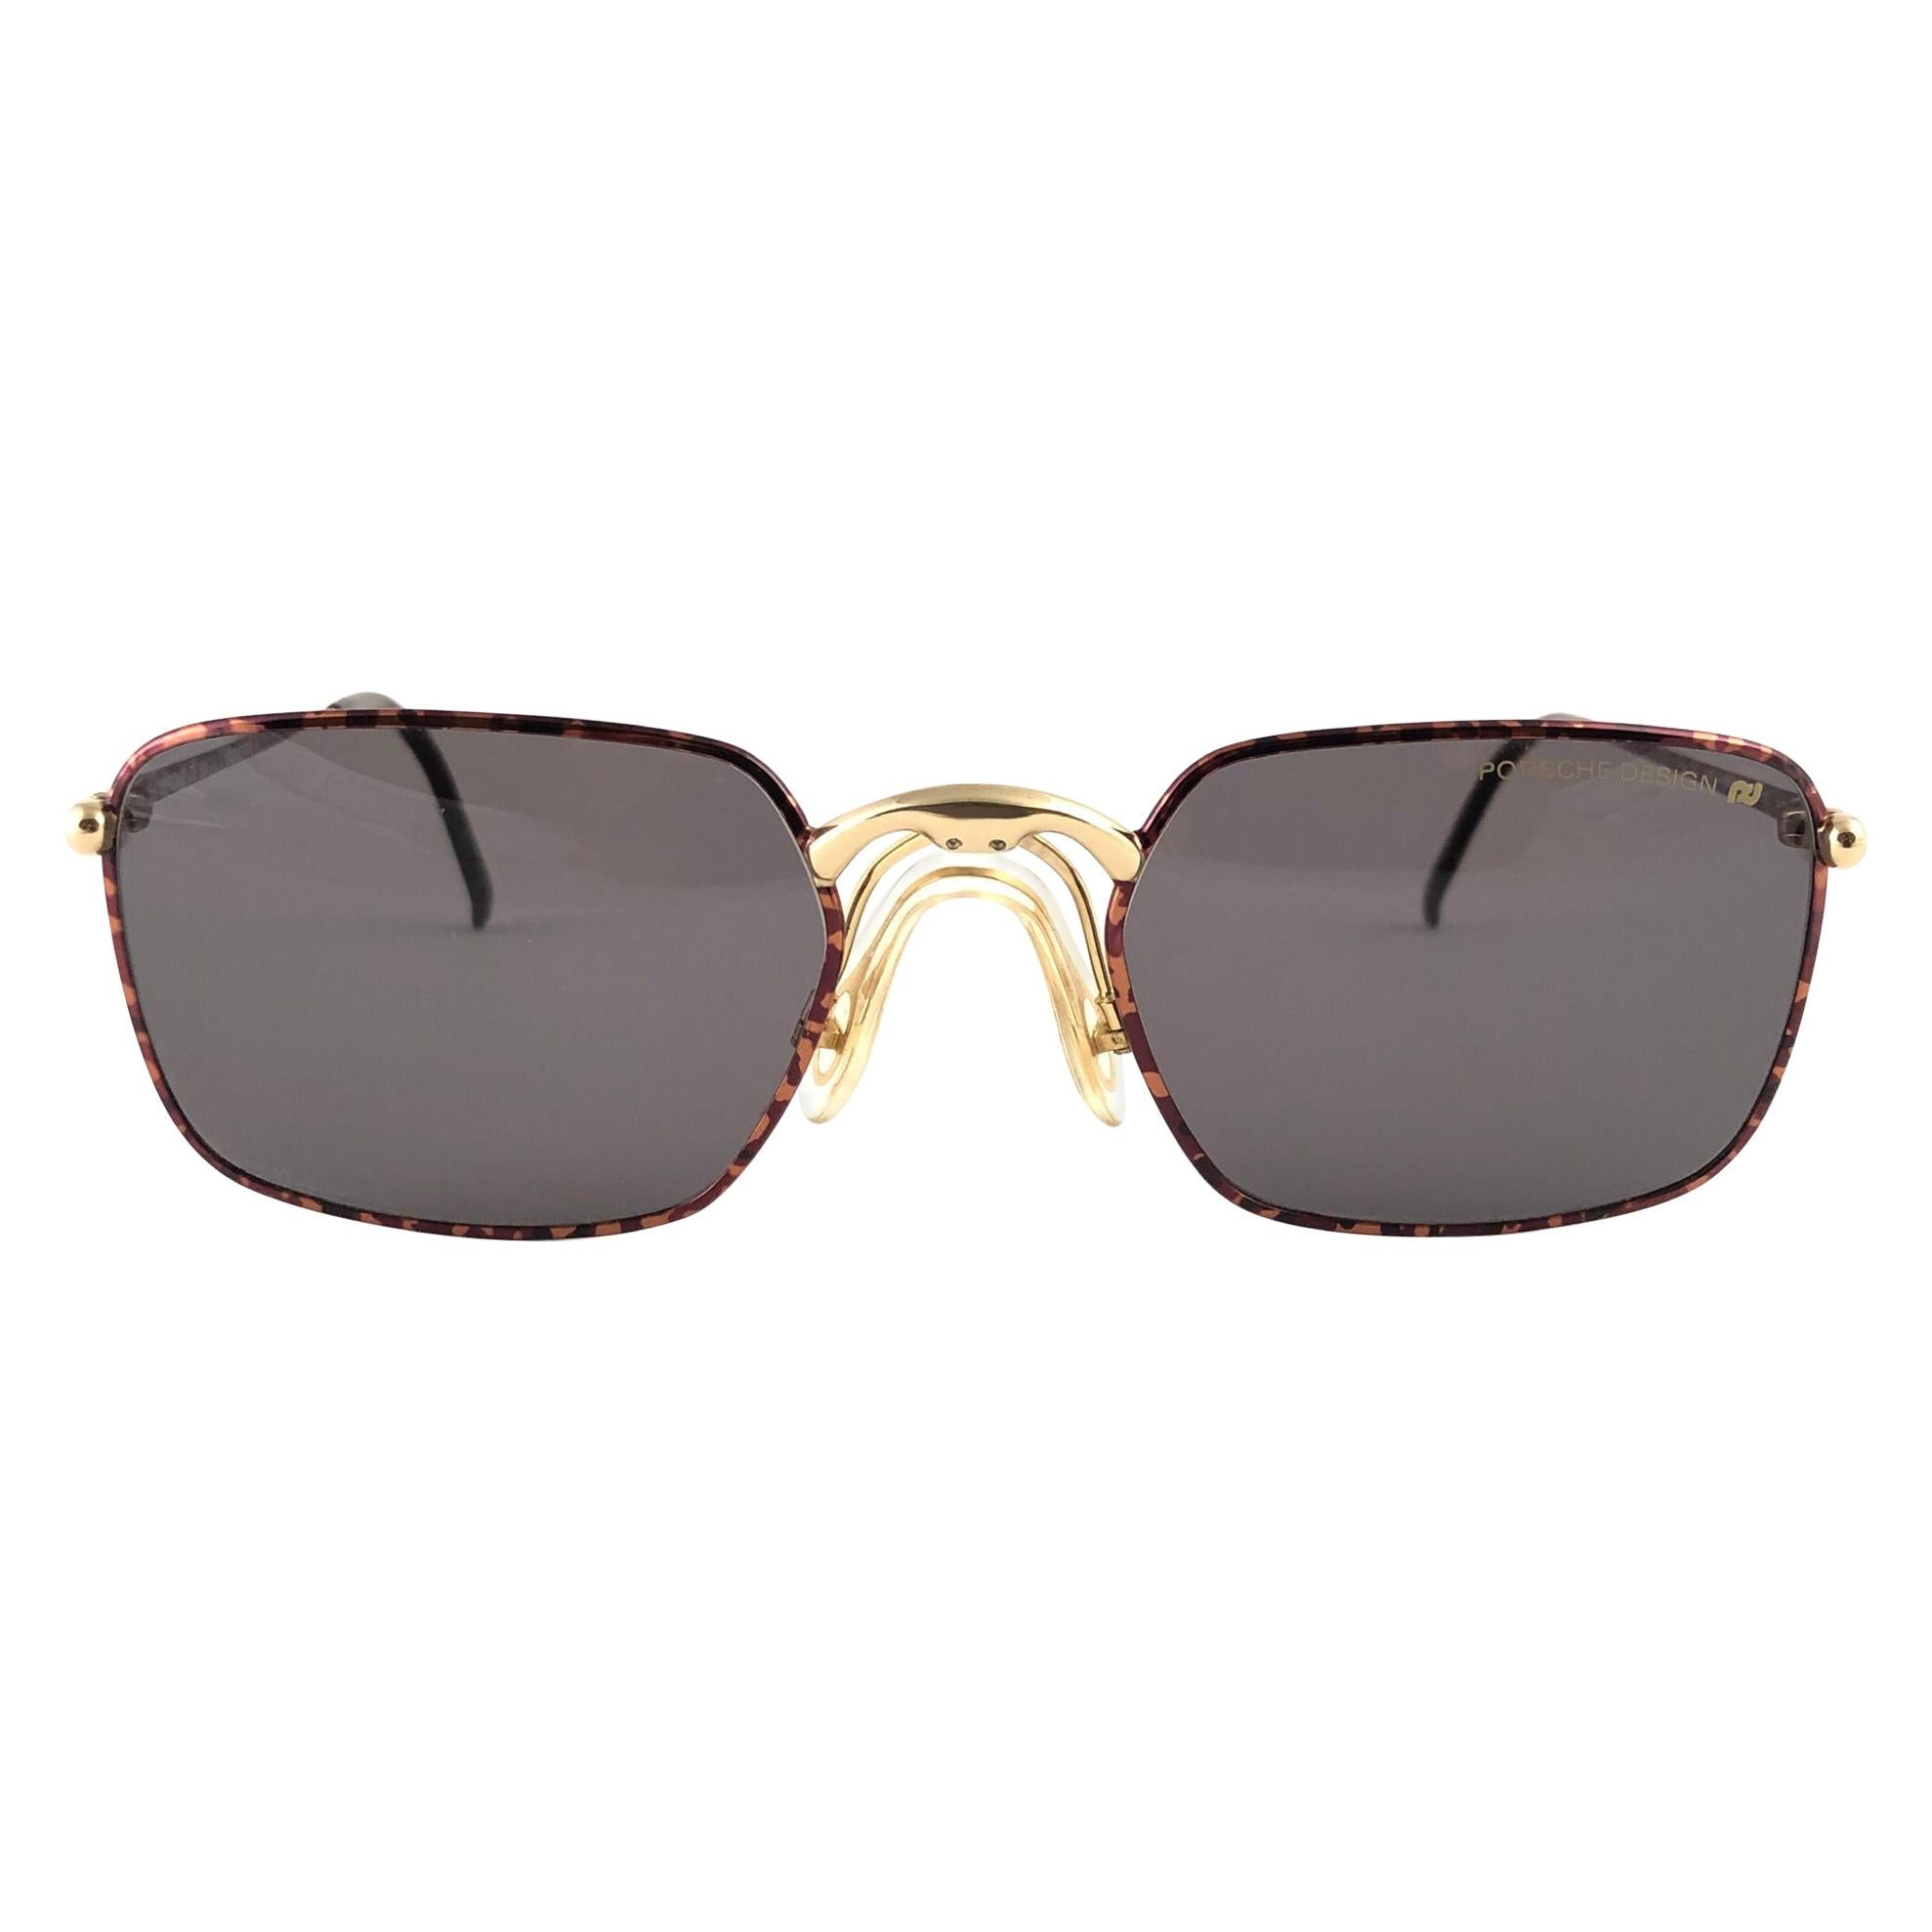 New Vintage Porsche Design By Carrera 5642 Brown Marbled and Gold Sunglasses